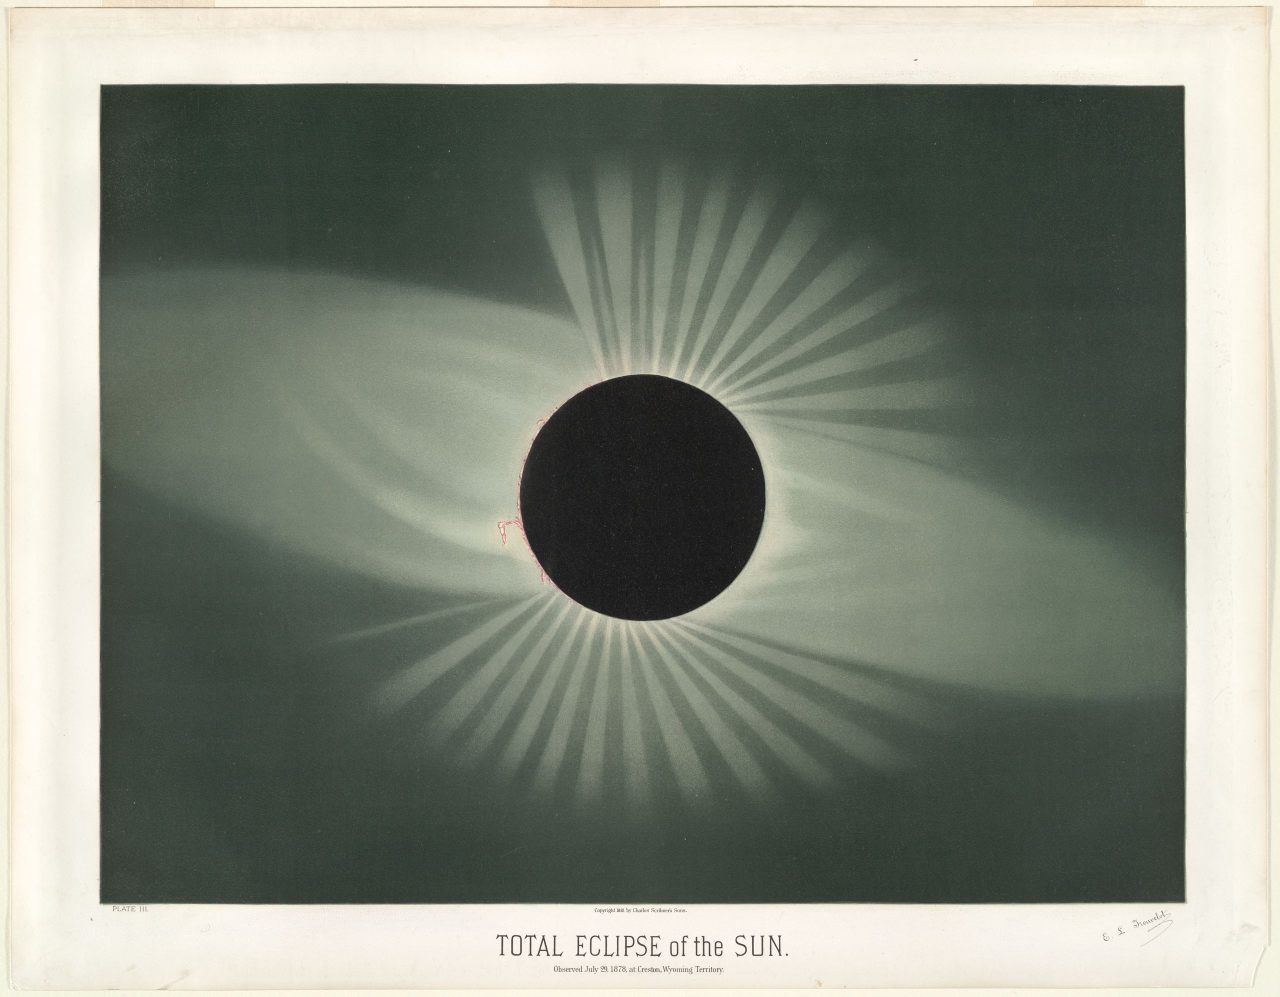 Étienne Léopold Trouvelot's illustrations of the July 1878 total solar eclipse, which he witnessed in Wyoming Territory, helped drive public interest in astronomy in the late 19th century.